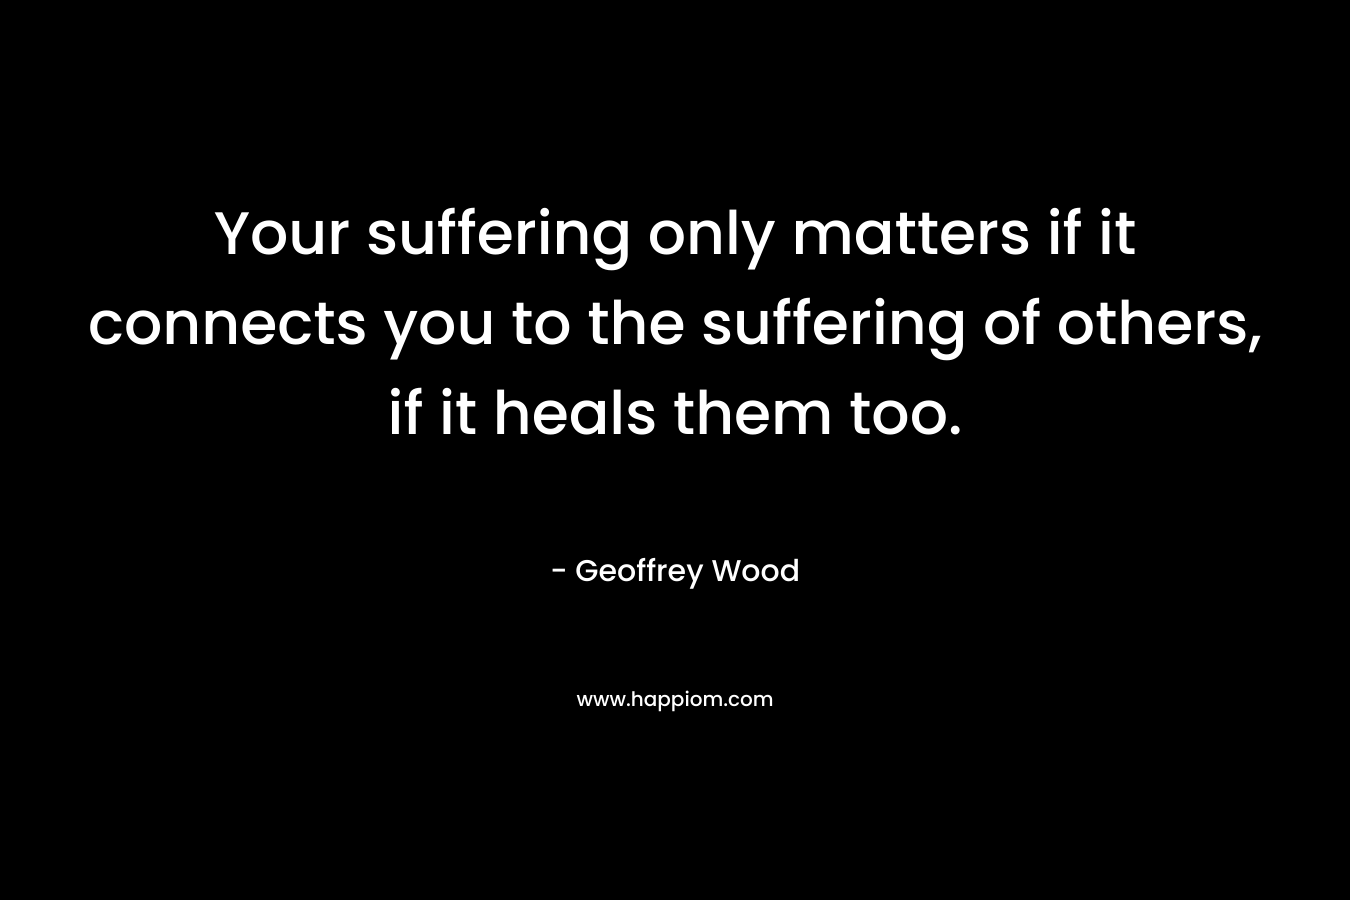 Your suffering only matters if it connects you to the suffering of others, if it heals them too.